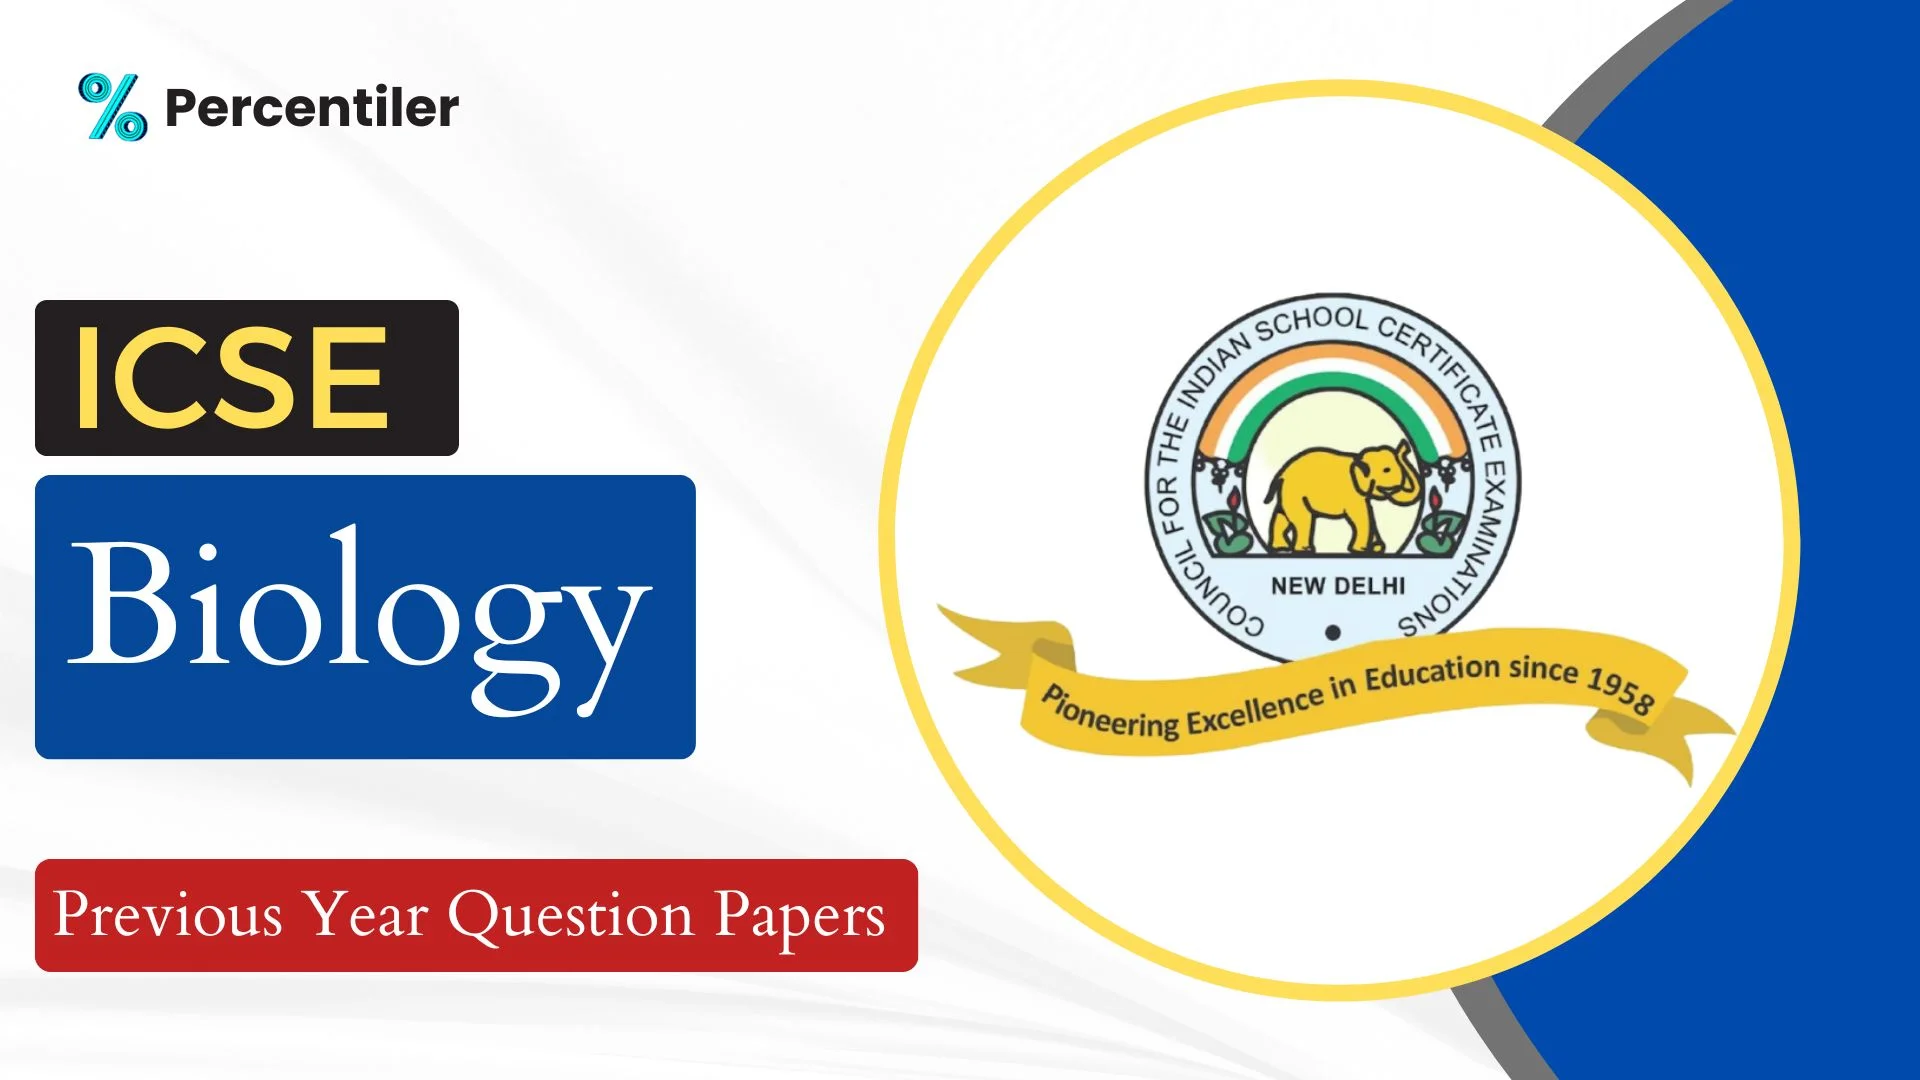 ICSE Biology Previous Year Question Papers